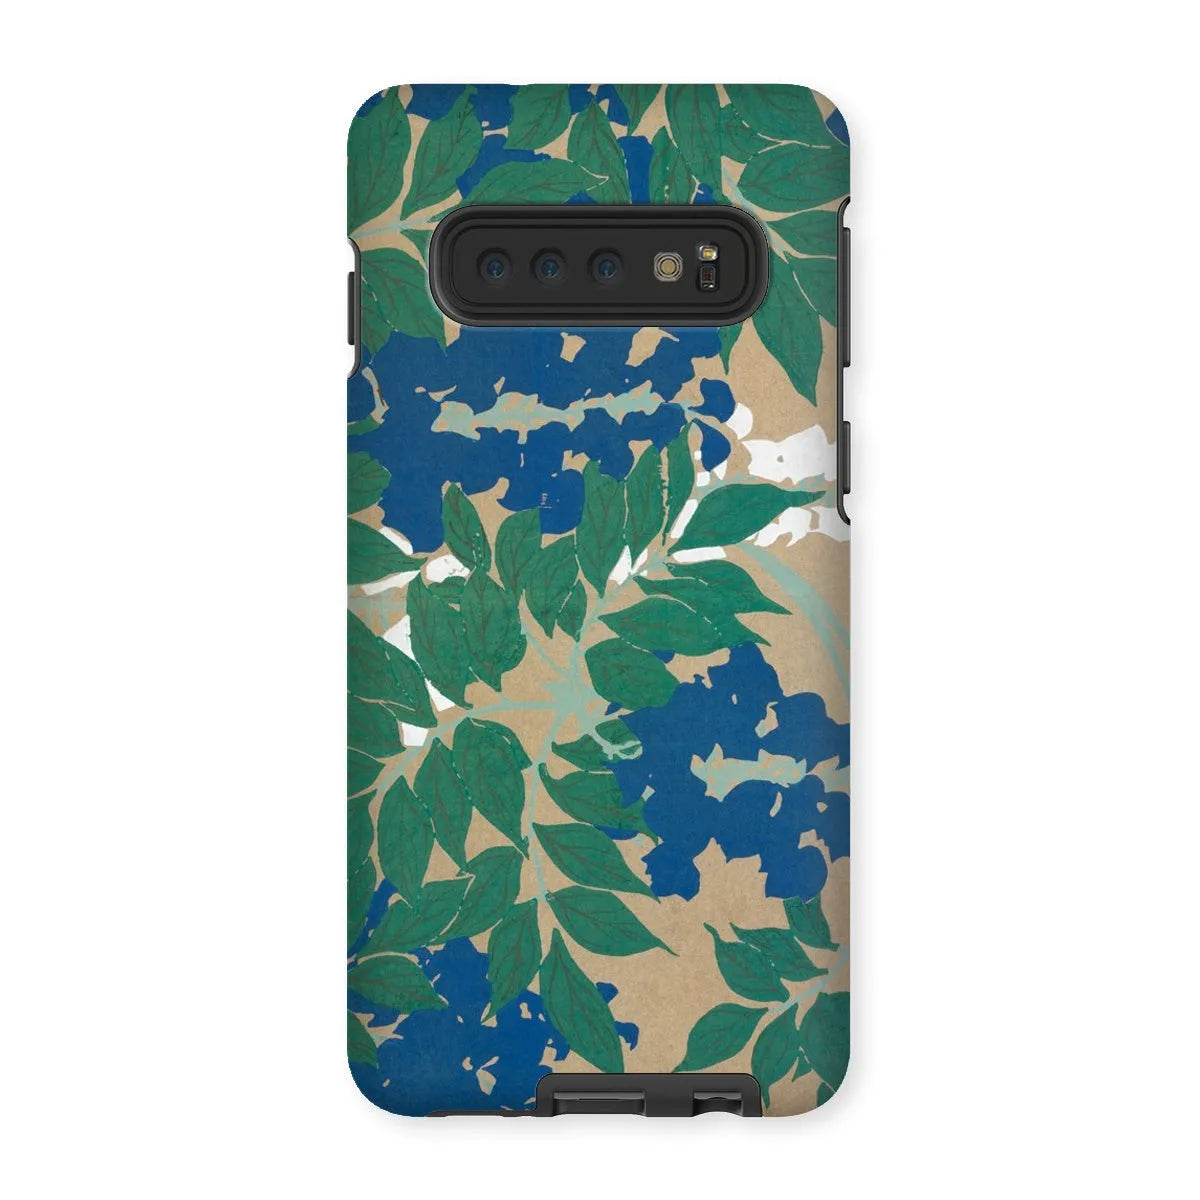 Wisteria From Momoyogusa - Floral Phone Case - Kamisaka Sekka - Samsung Galaxy S10 / Matte - Mobile Phone Cases